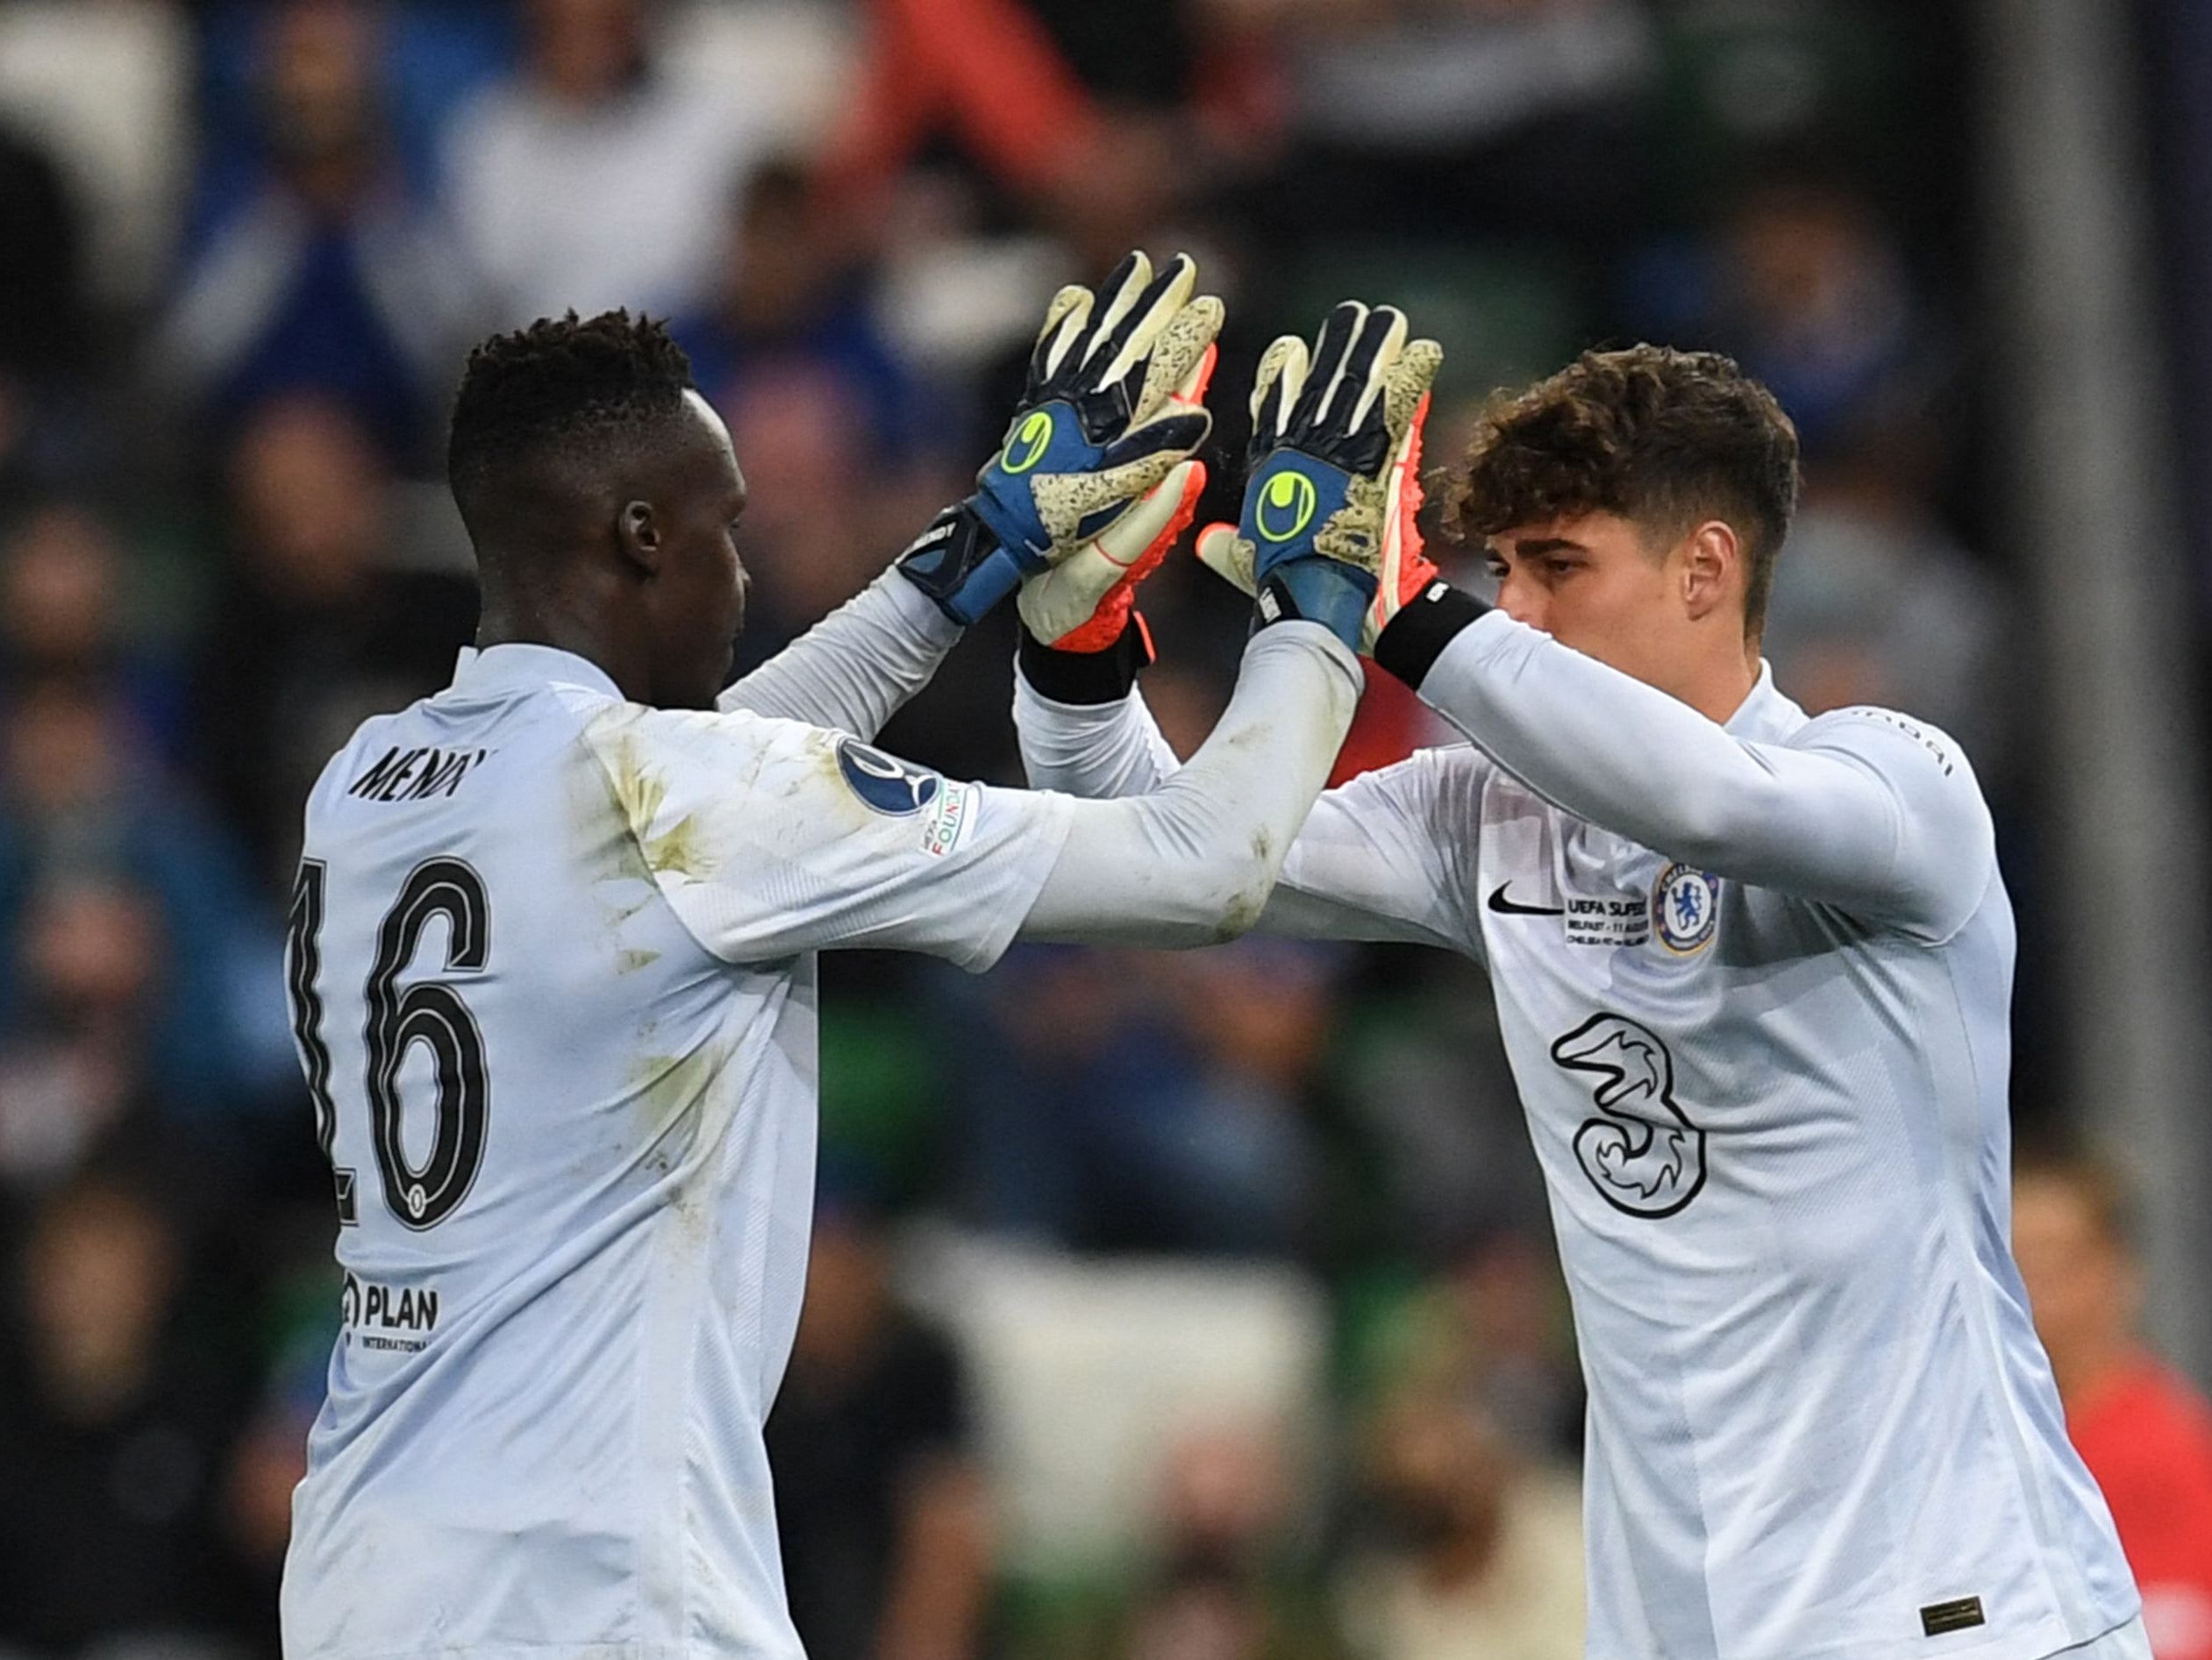 Thomas Tuchel is torn over whether to start Kepa Arrizabalaga or Edouard Mendy against Liverpool